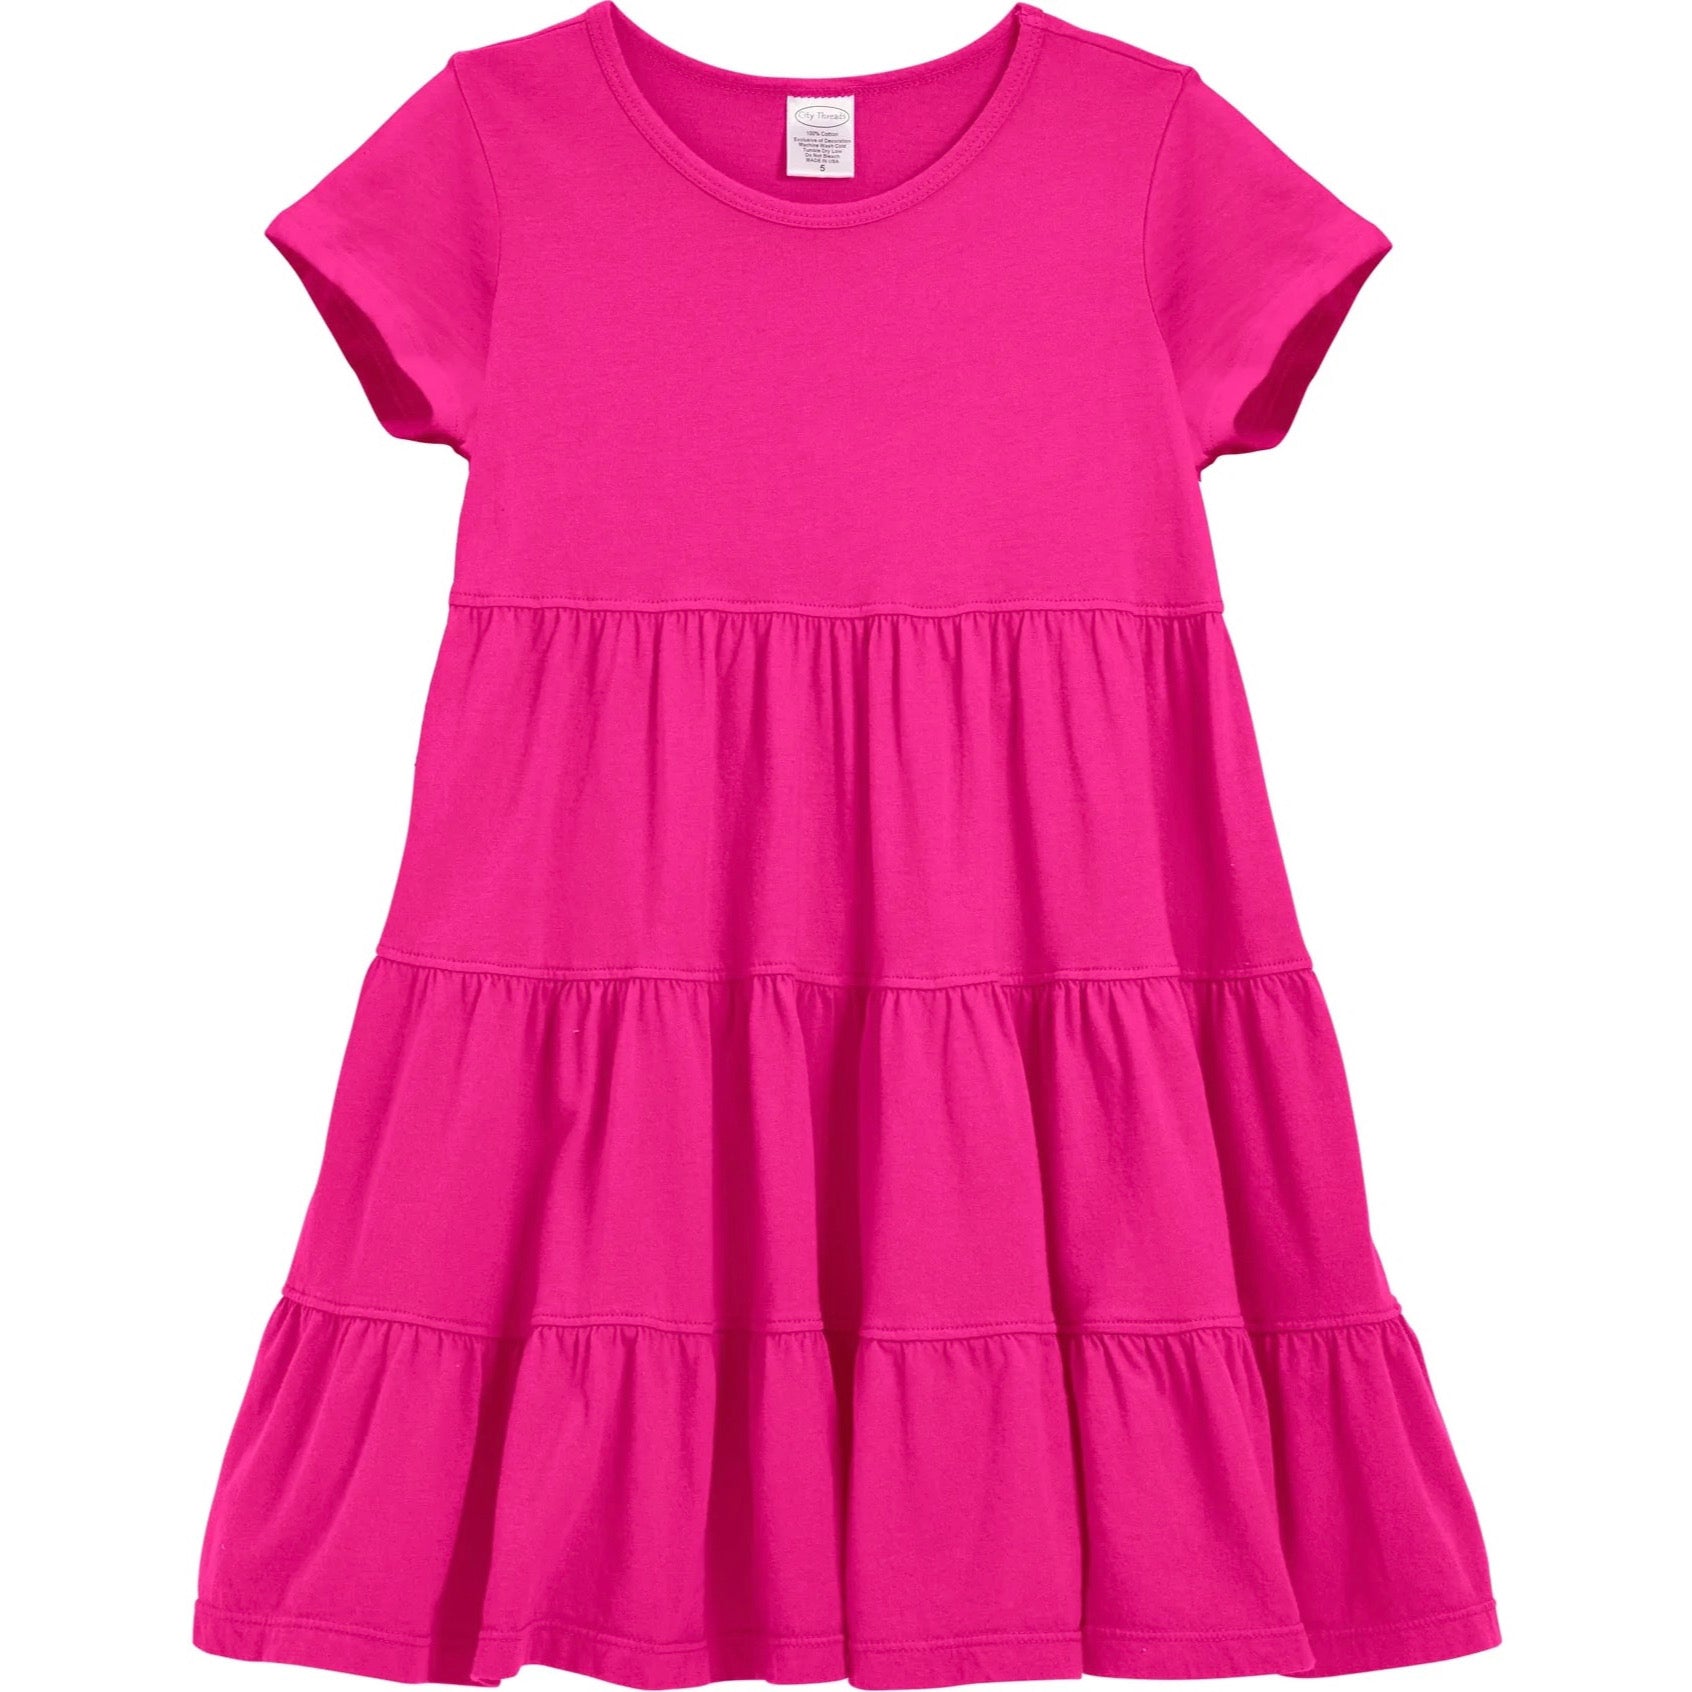 Made in USA Short Sleeve Toddler Dress - Hot Pink - Tiered Cotton